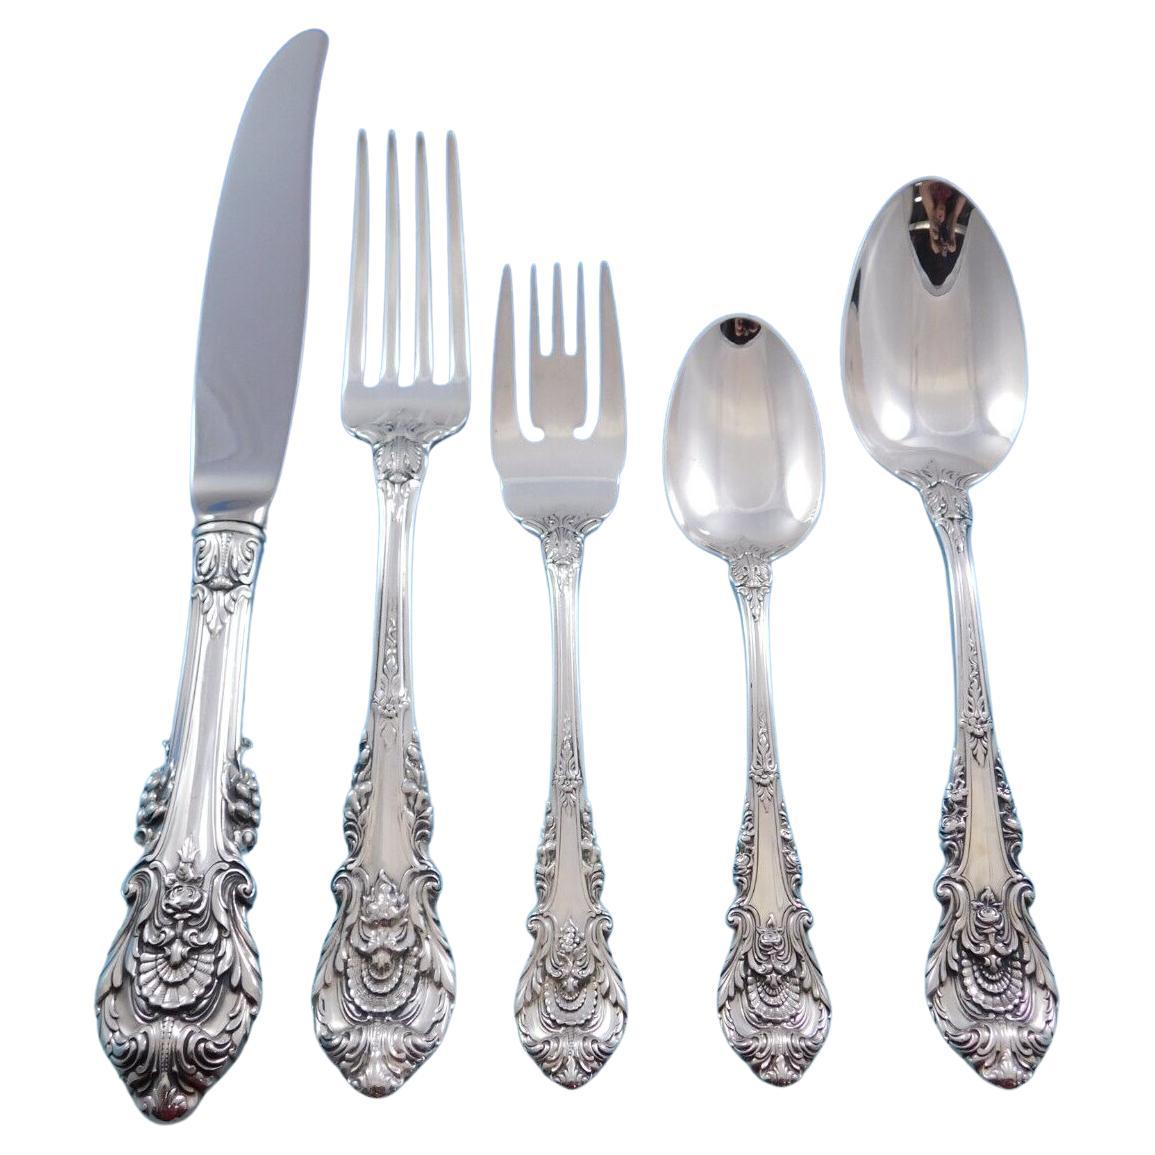 Sir Christopher by Wallace Sterling Silver Flatware Set 12 Service 65 Pcs Dinner For Sale